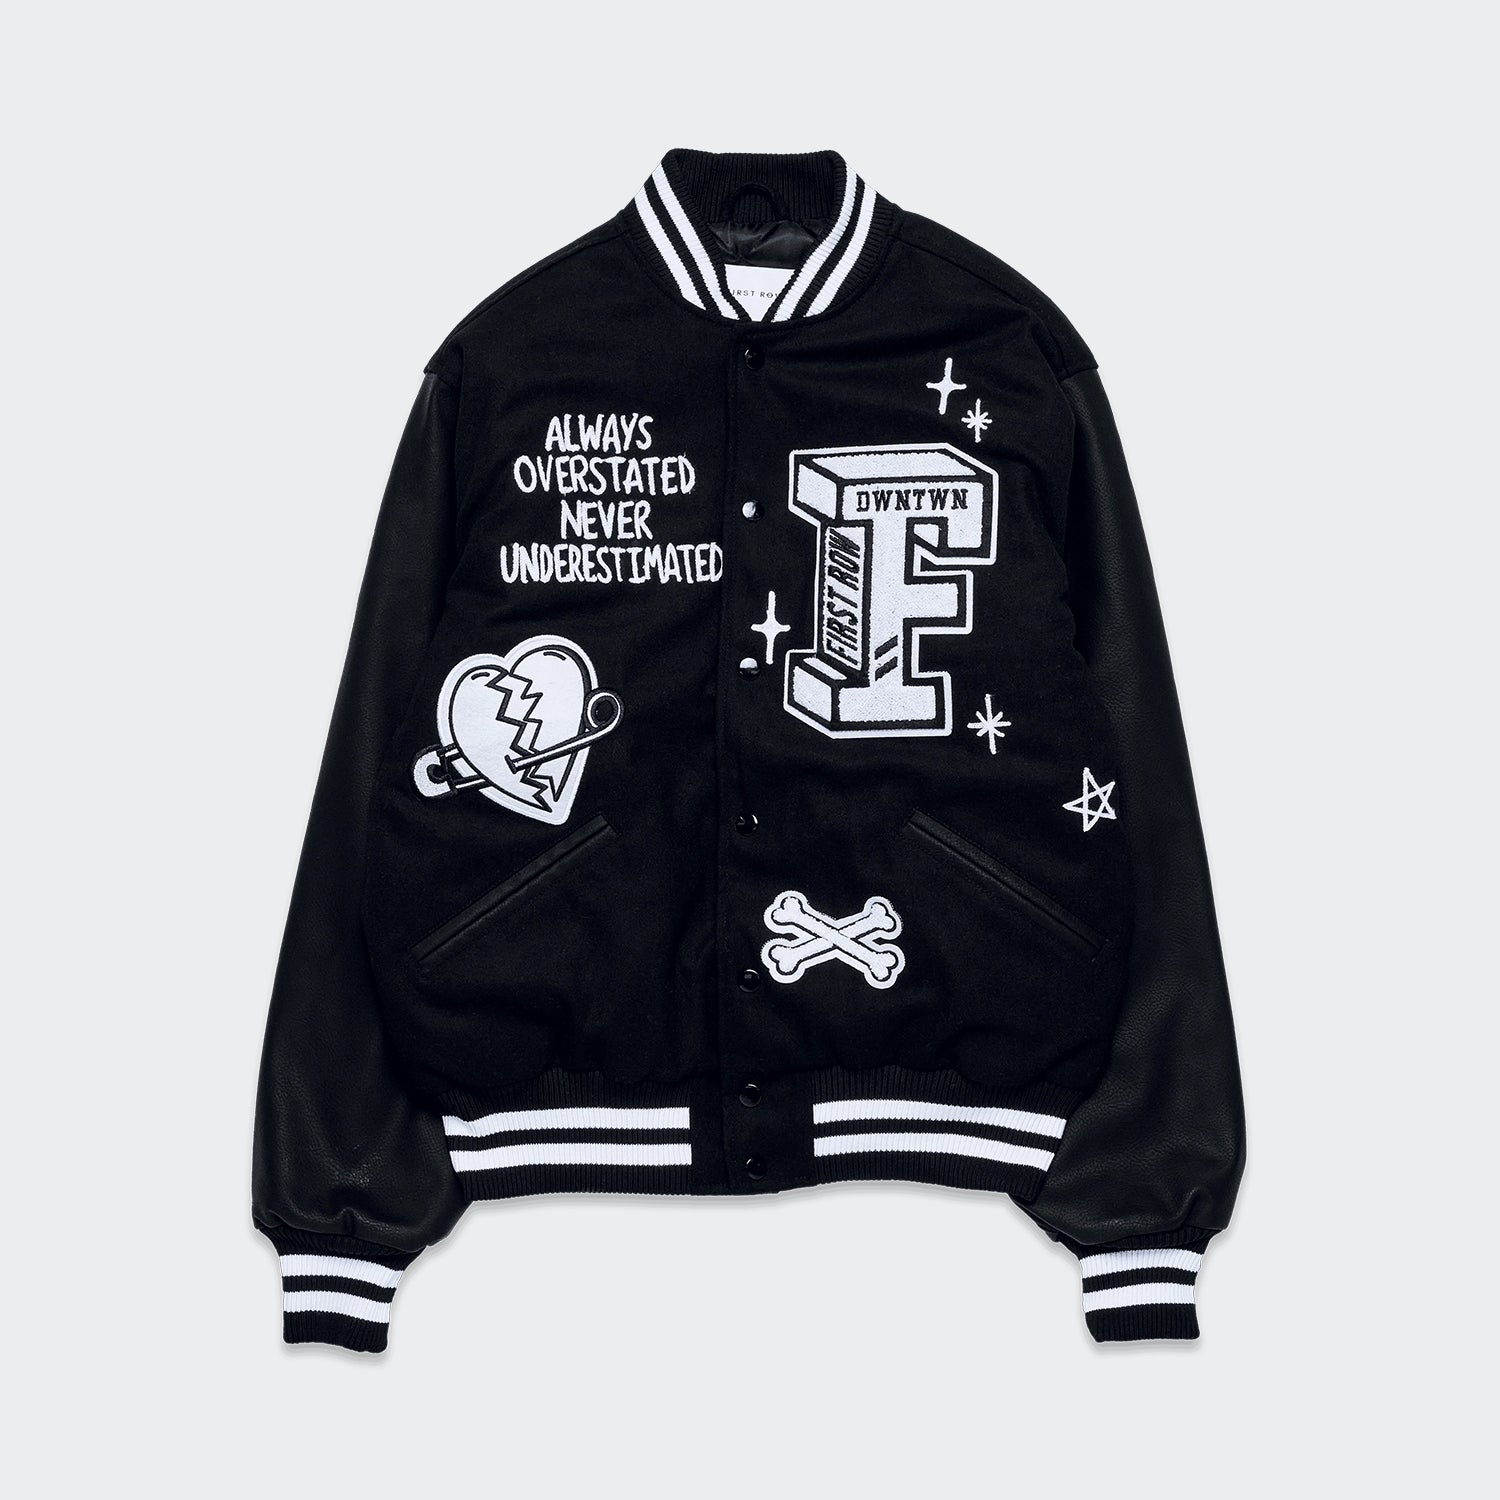 This baby varsity jacket just gave me life twice. I jus…